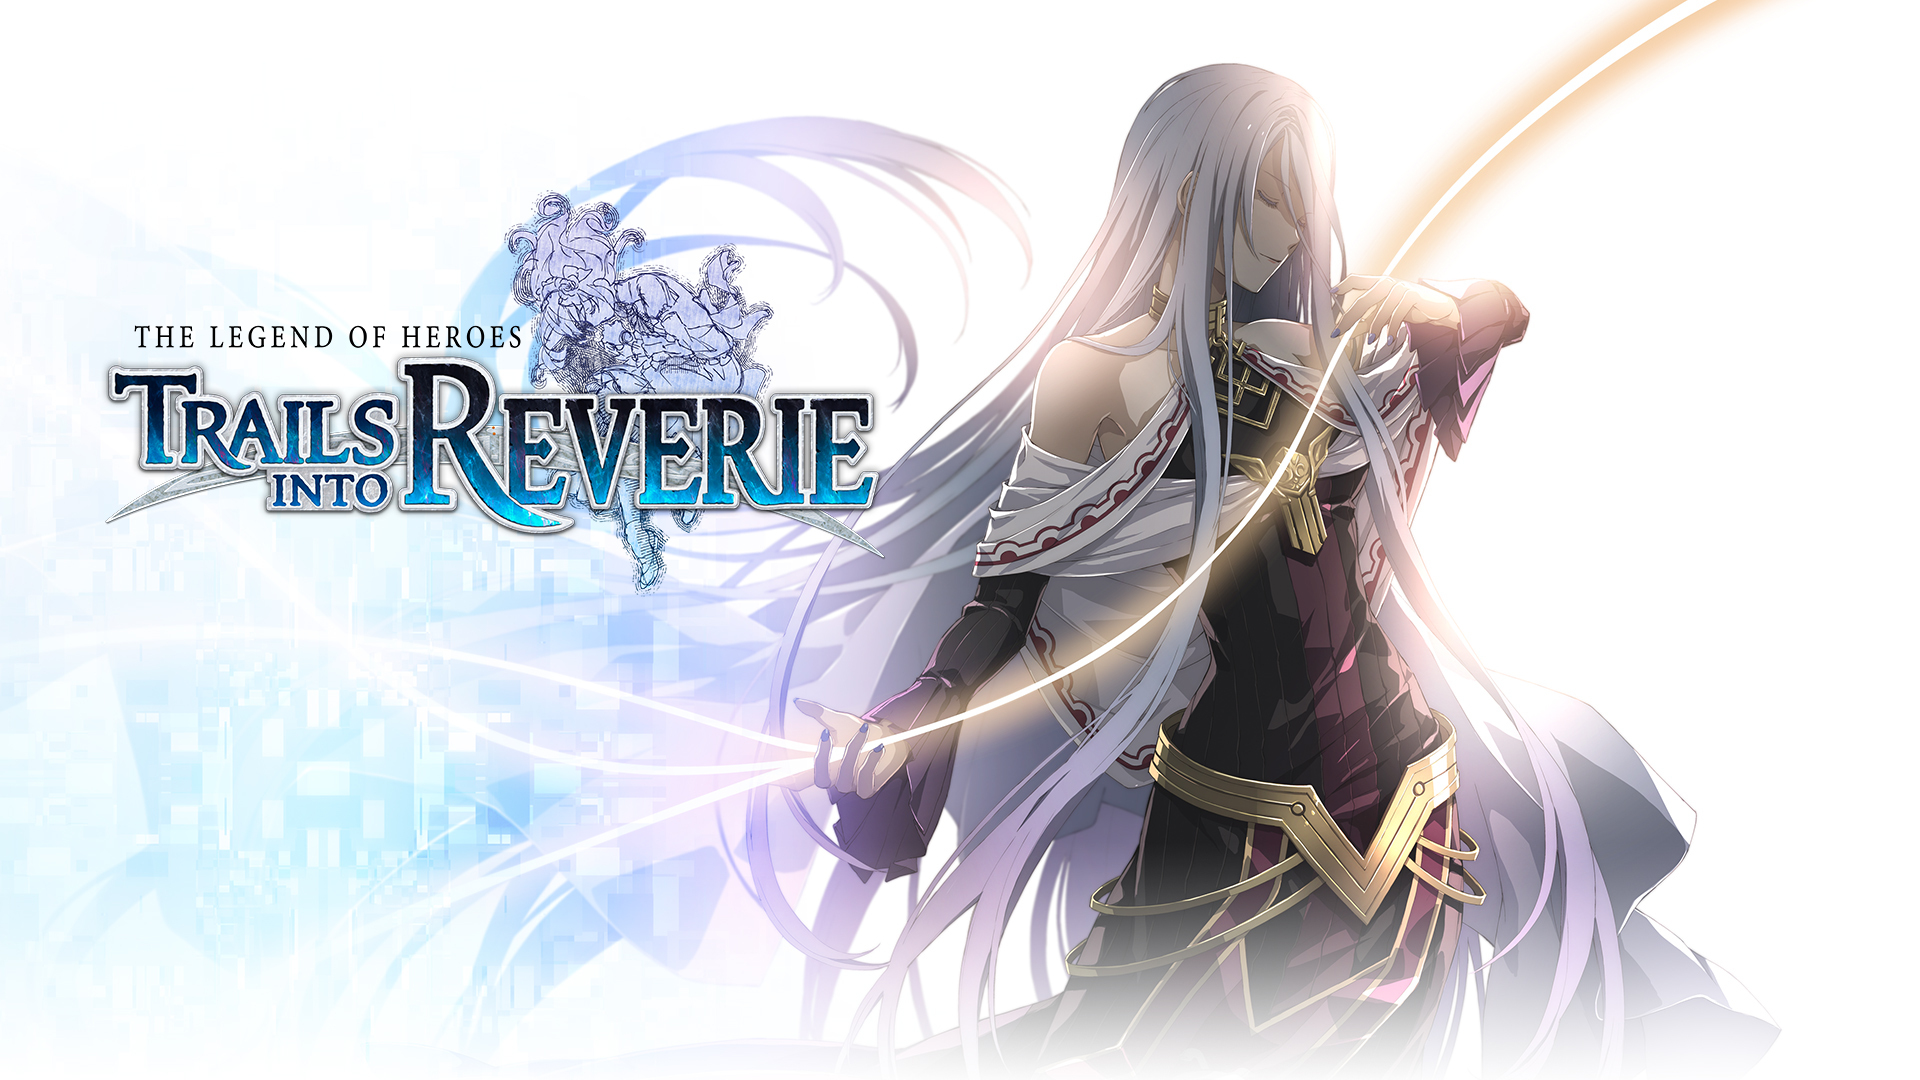 The Legend of Heroes: Trails into Reverie screenshots, image and picture